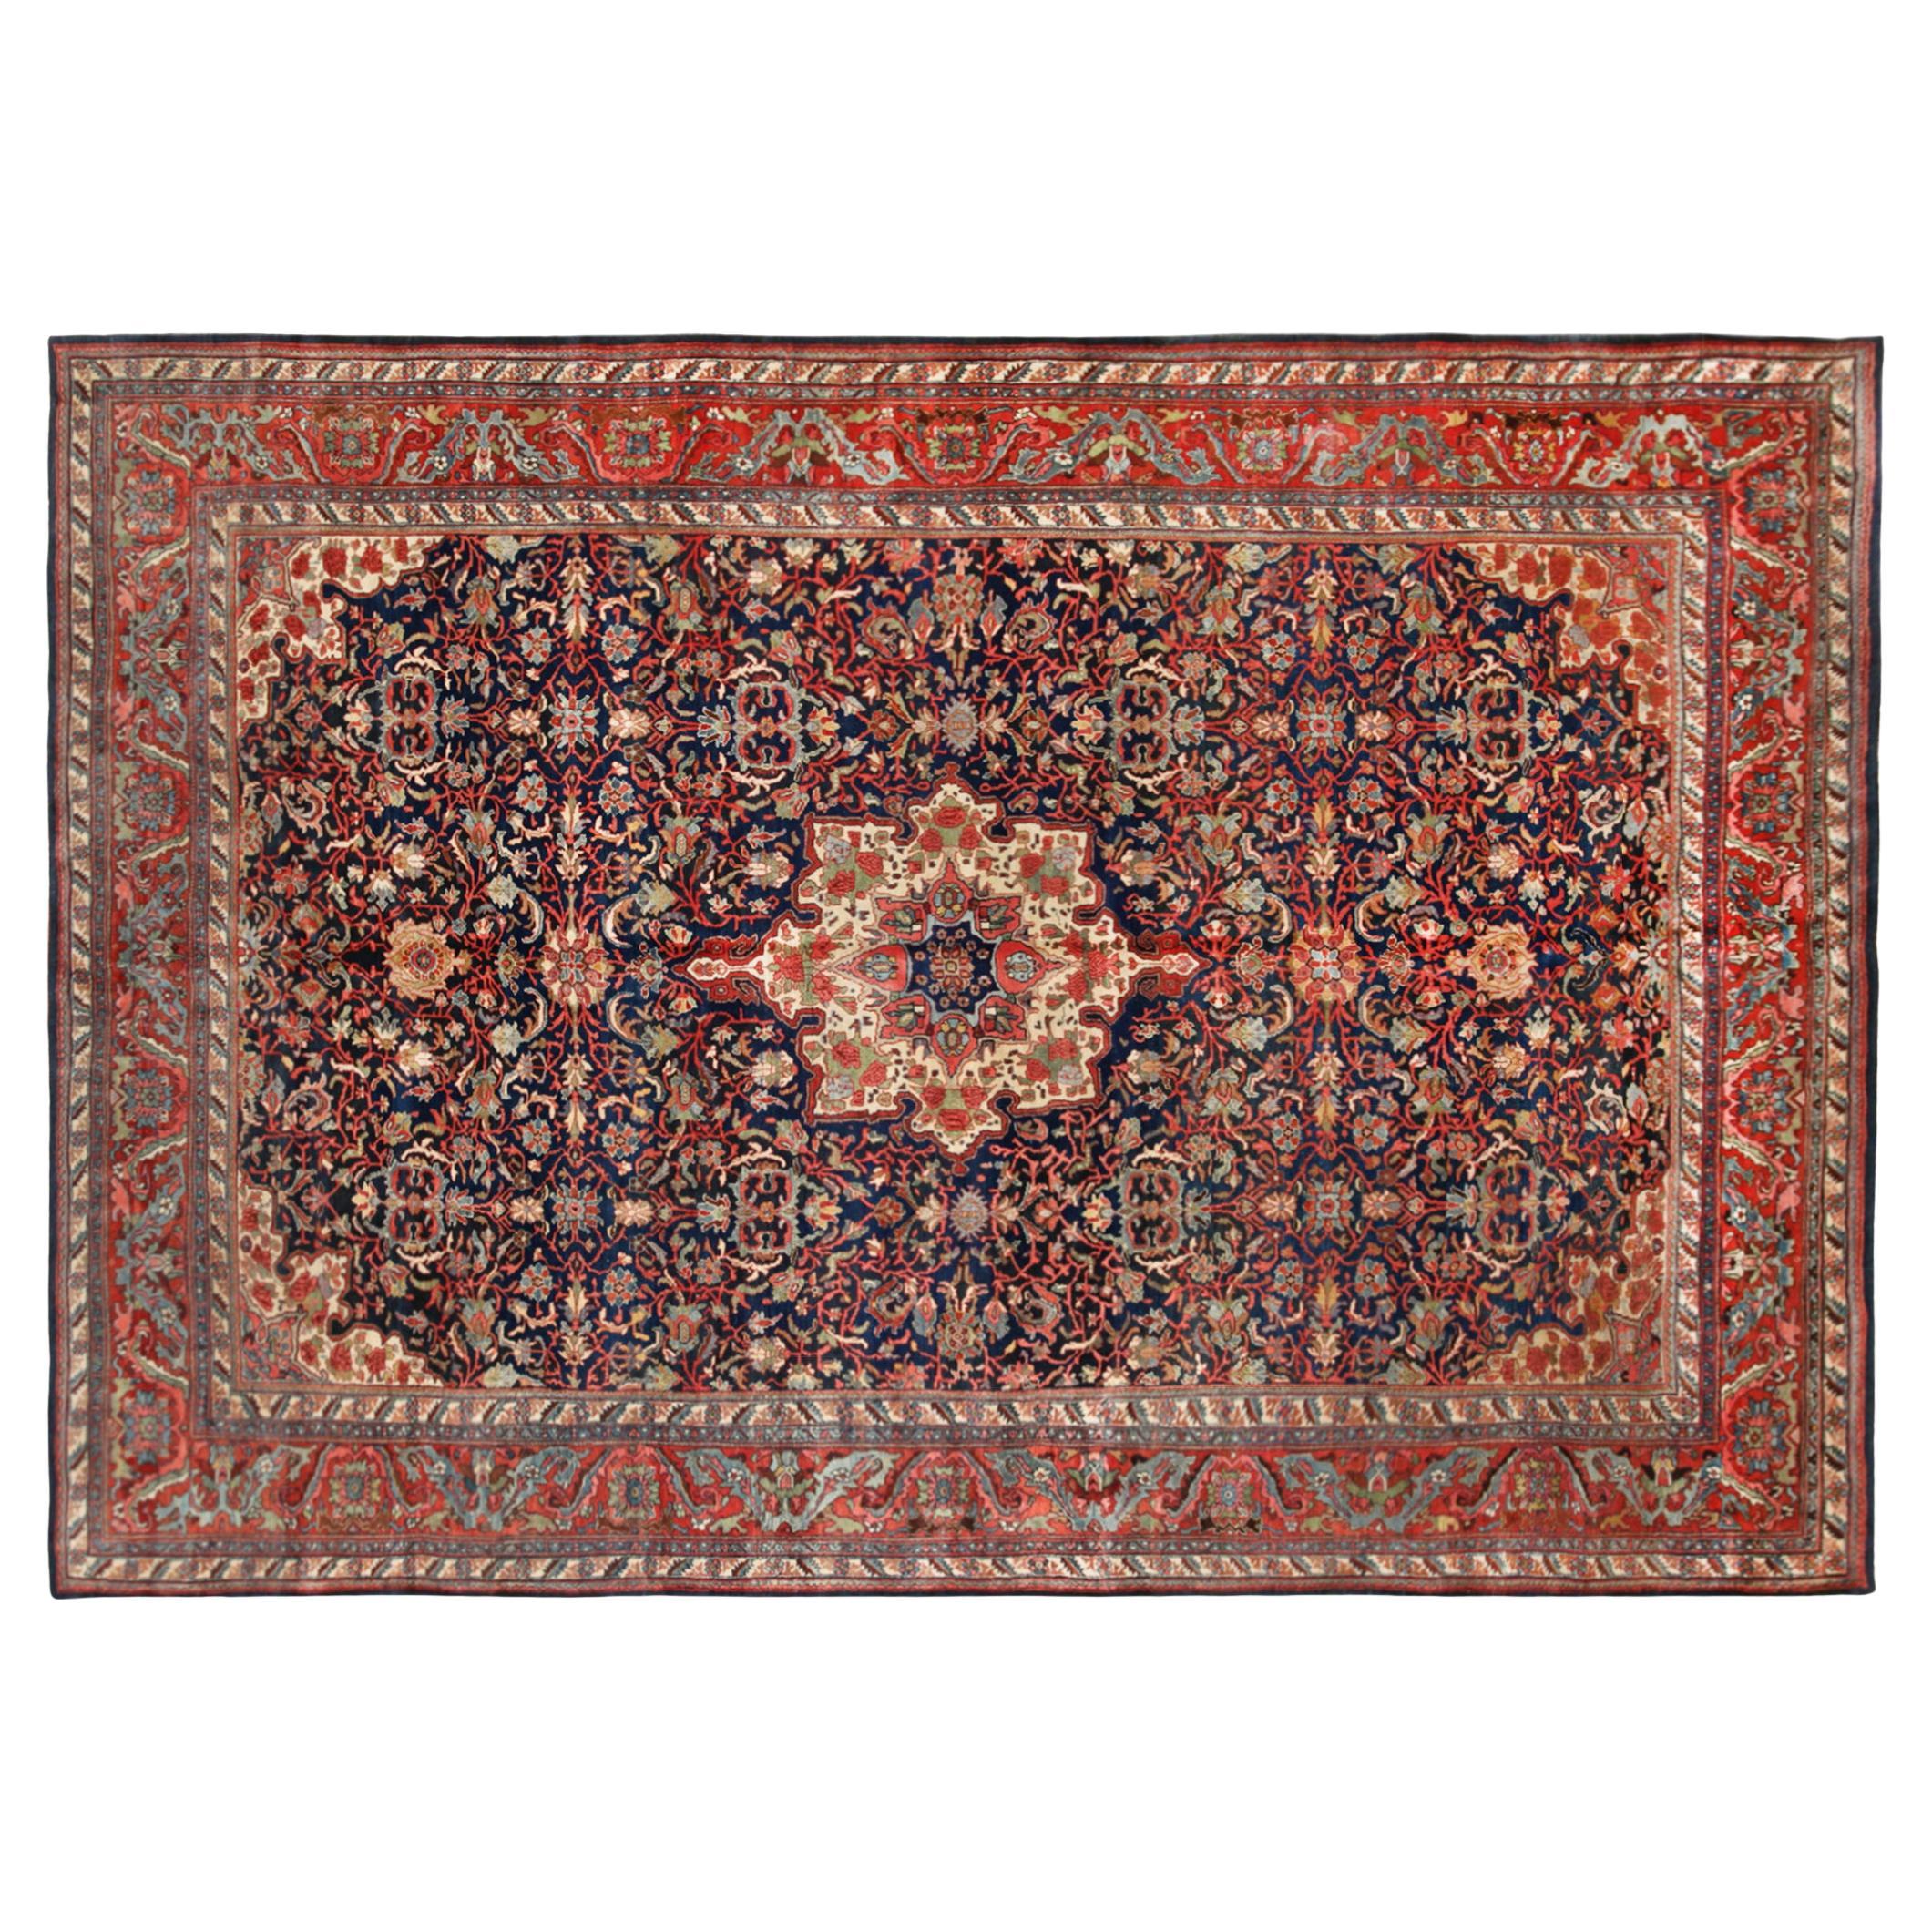 Antique Persian Bidjar Oriental Rug, in Room Size, with Central Medallion